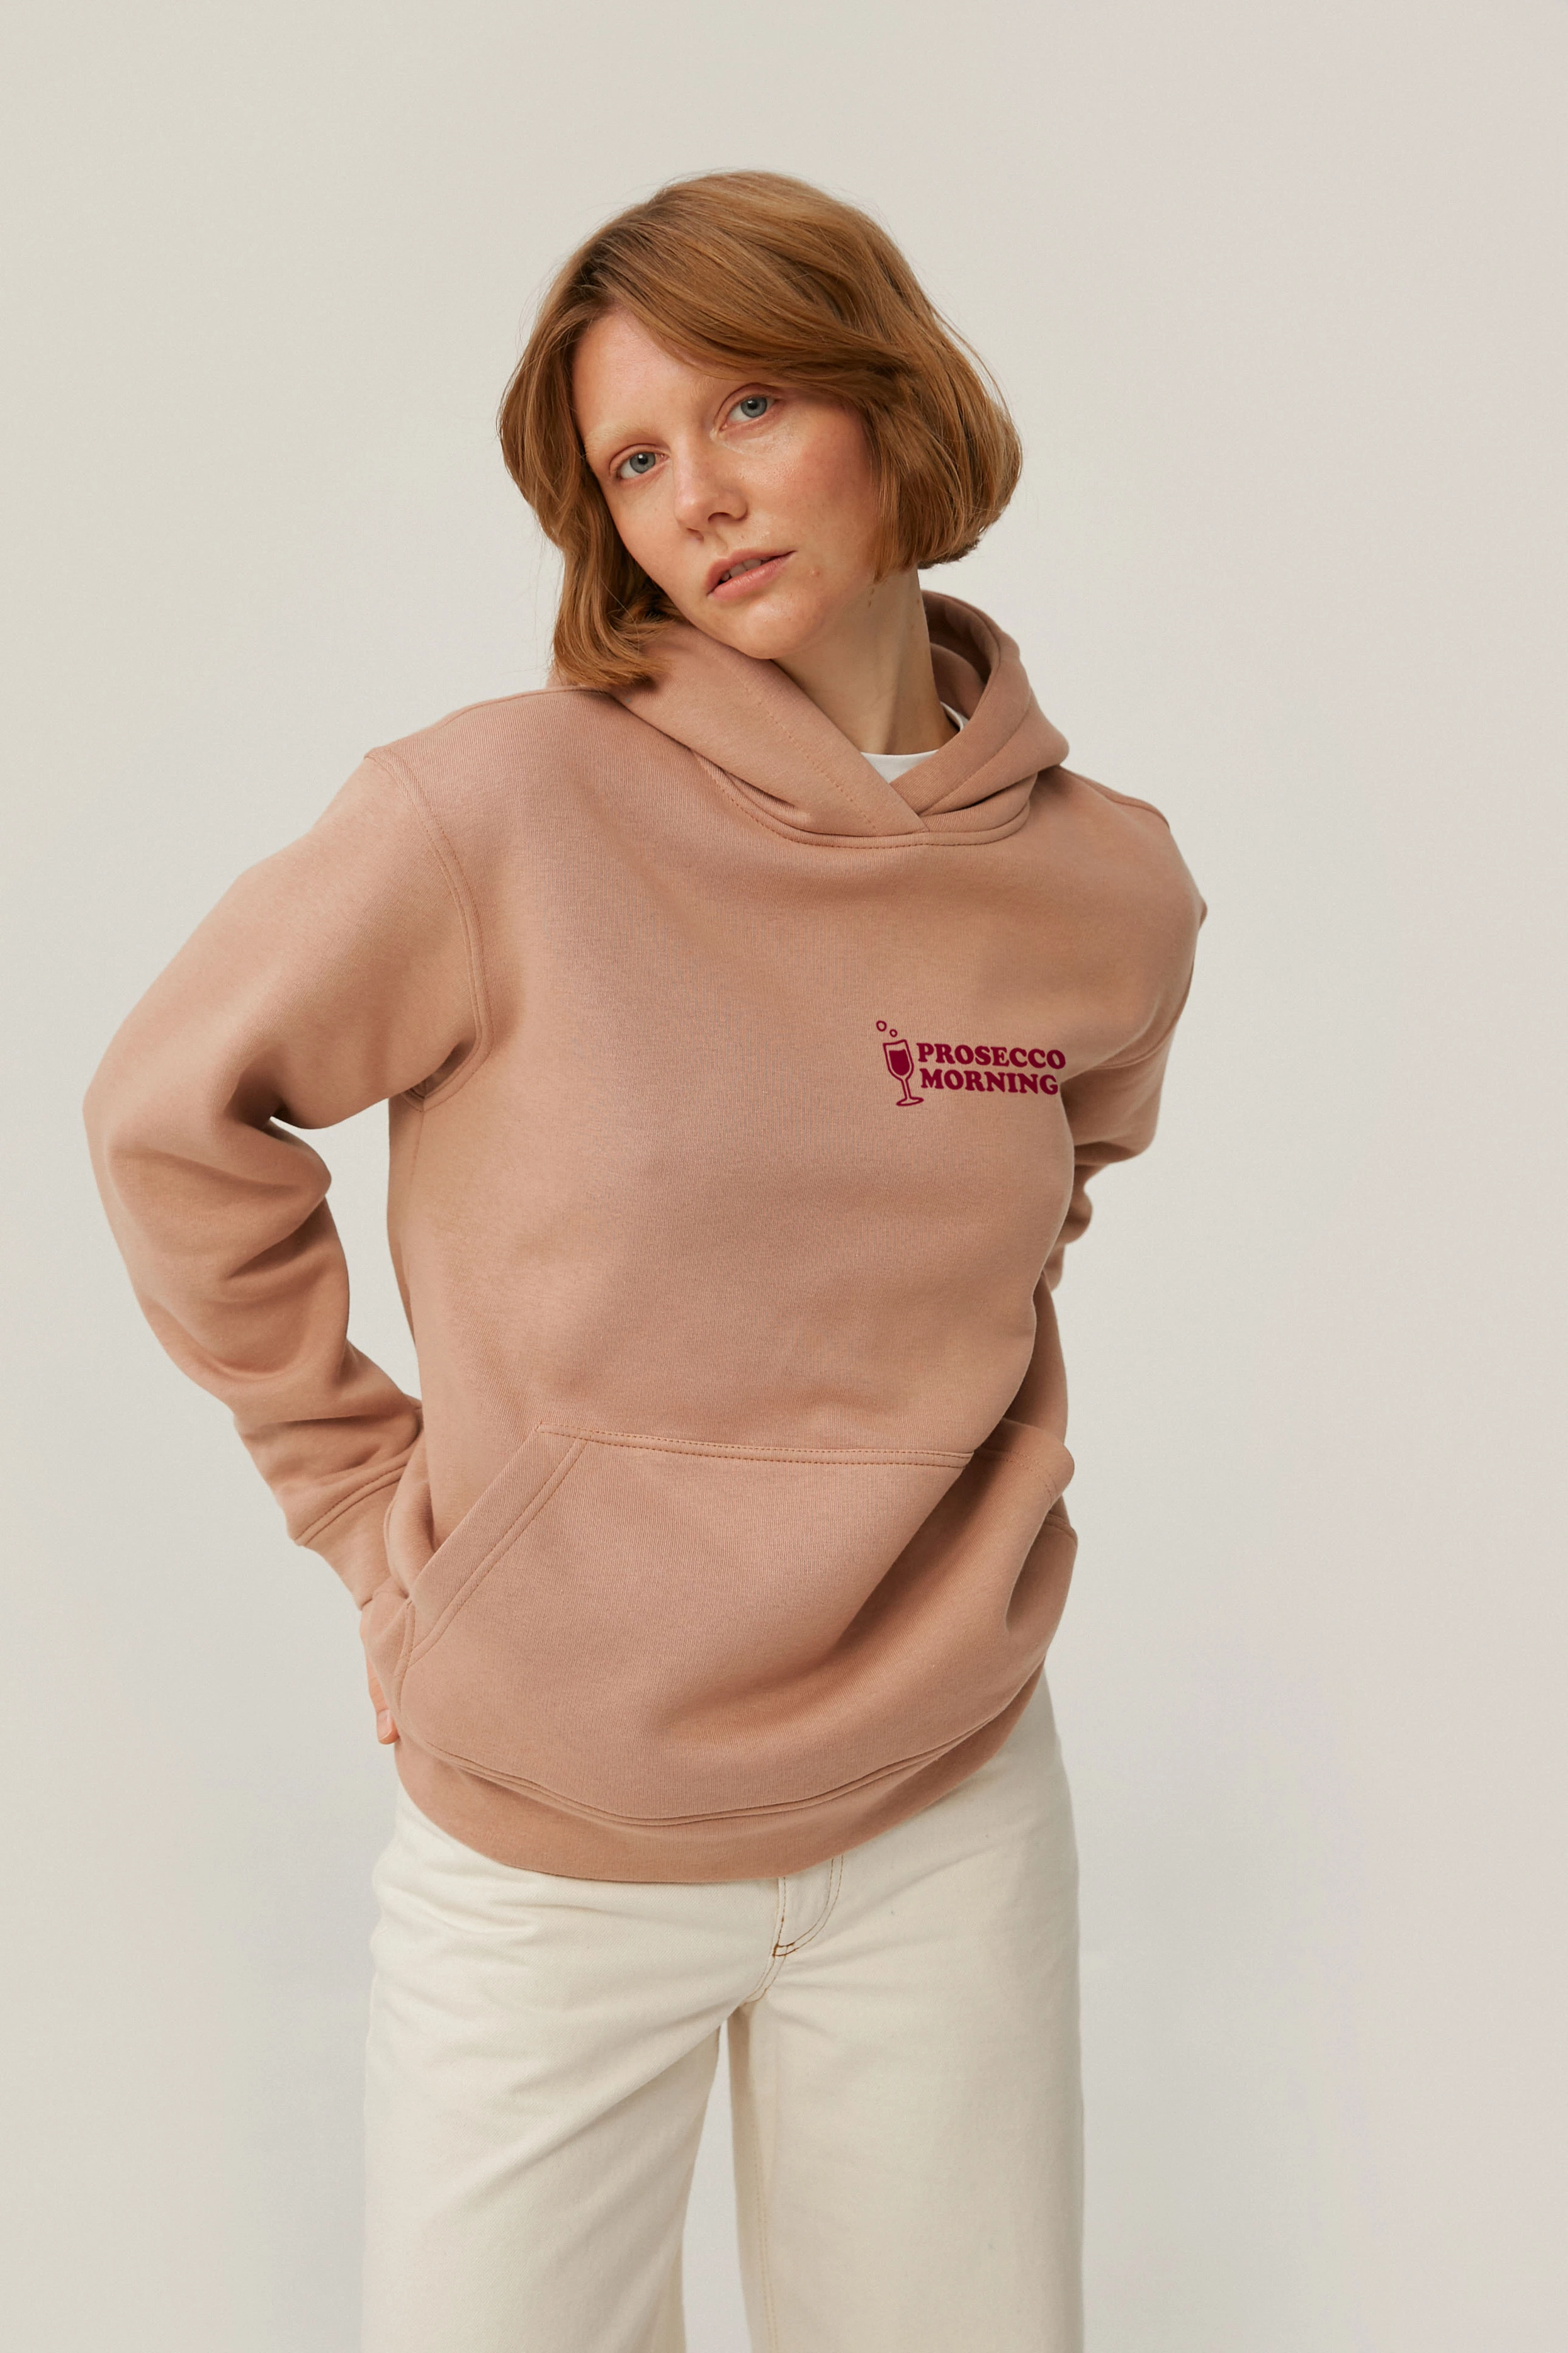 Beige jersey hoodie "Prosecco morning" with fleece, photo 4